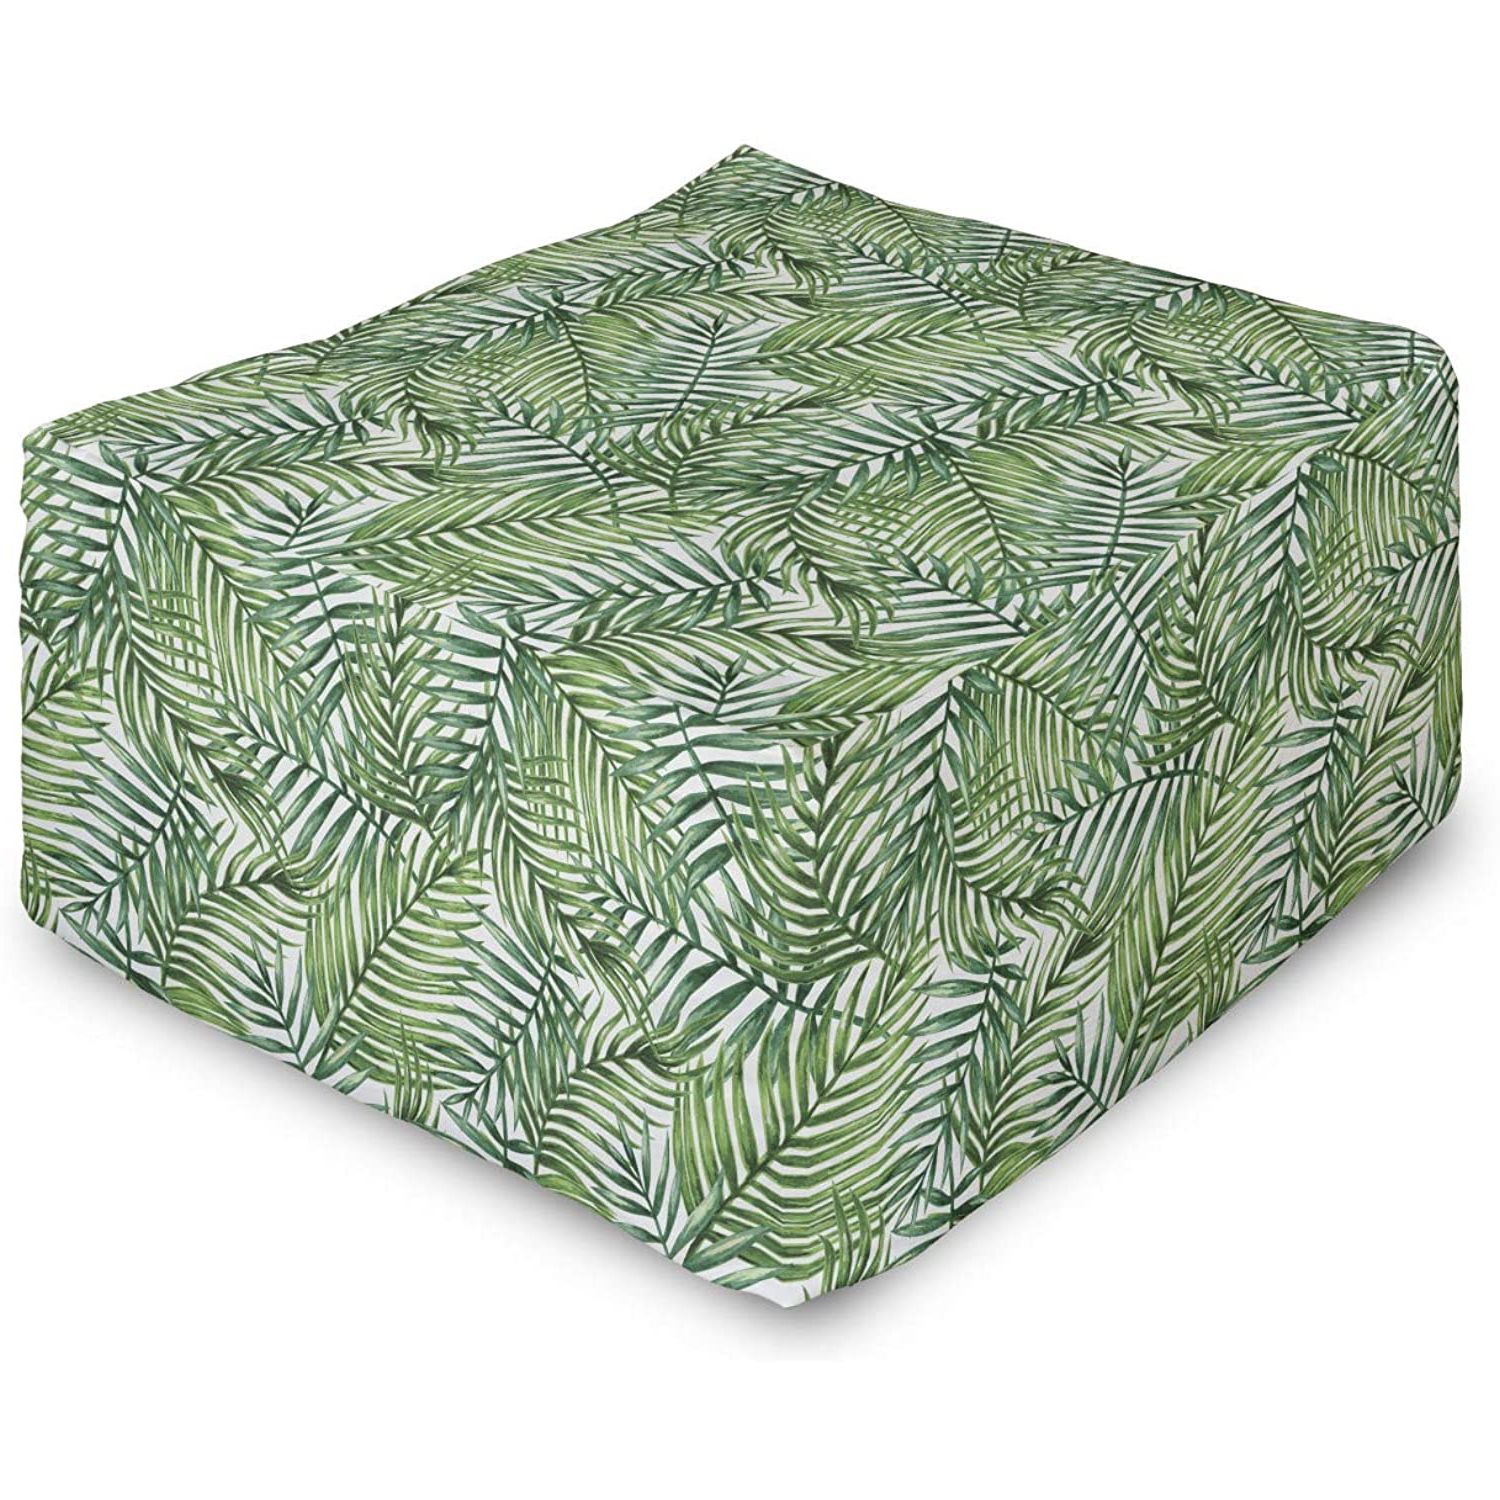 Amazon: Ambesonne Leaf Rectangle Pouf, Watercolor Print Botanical For Well Known Blue And Beige Ombre Cylinder Pouf Ottomans (View 8 of 10)